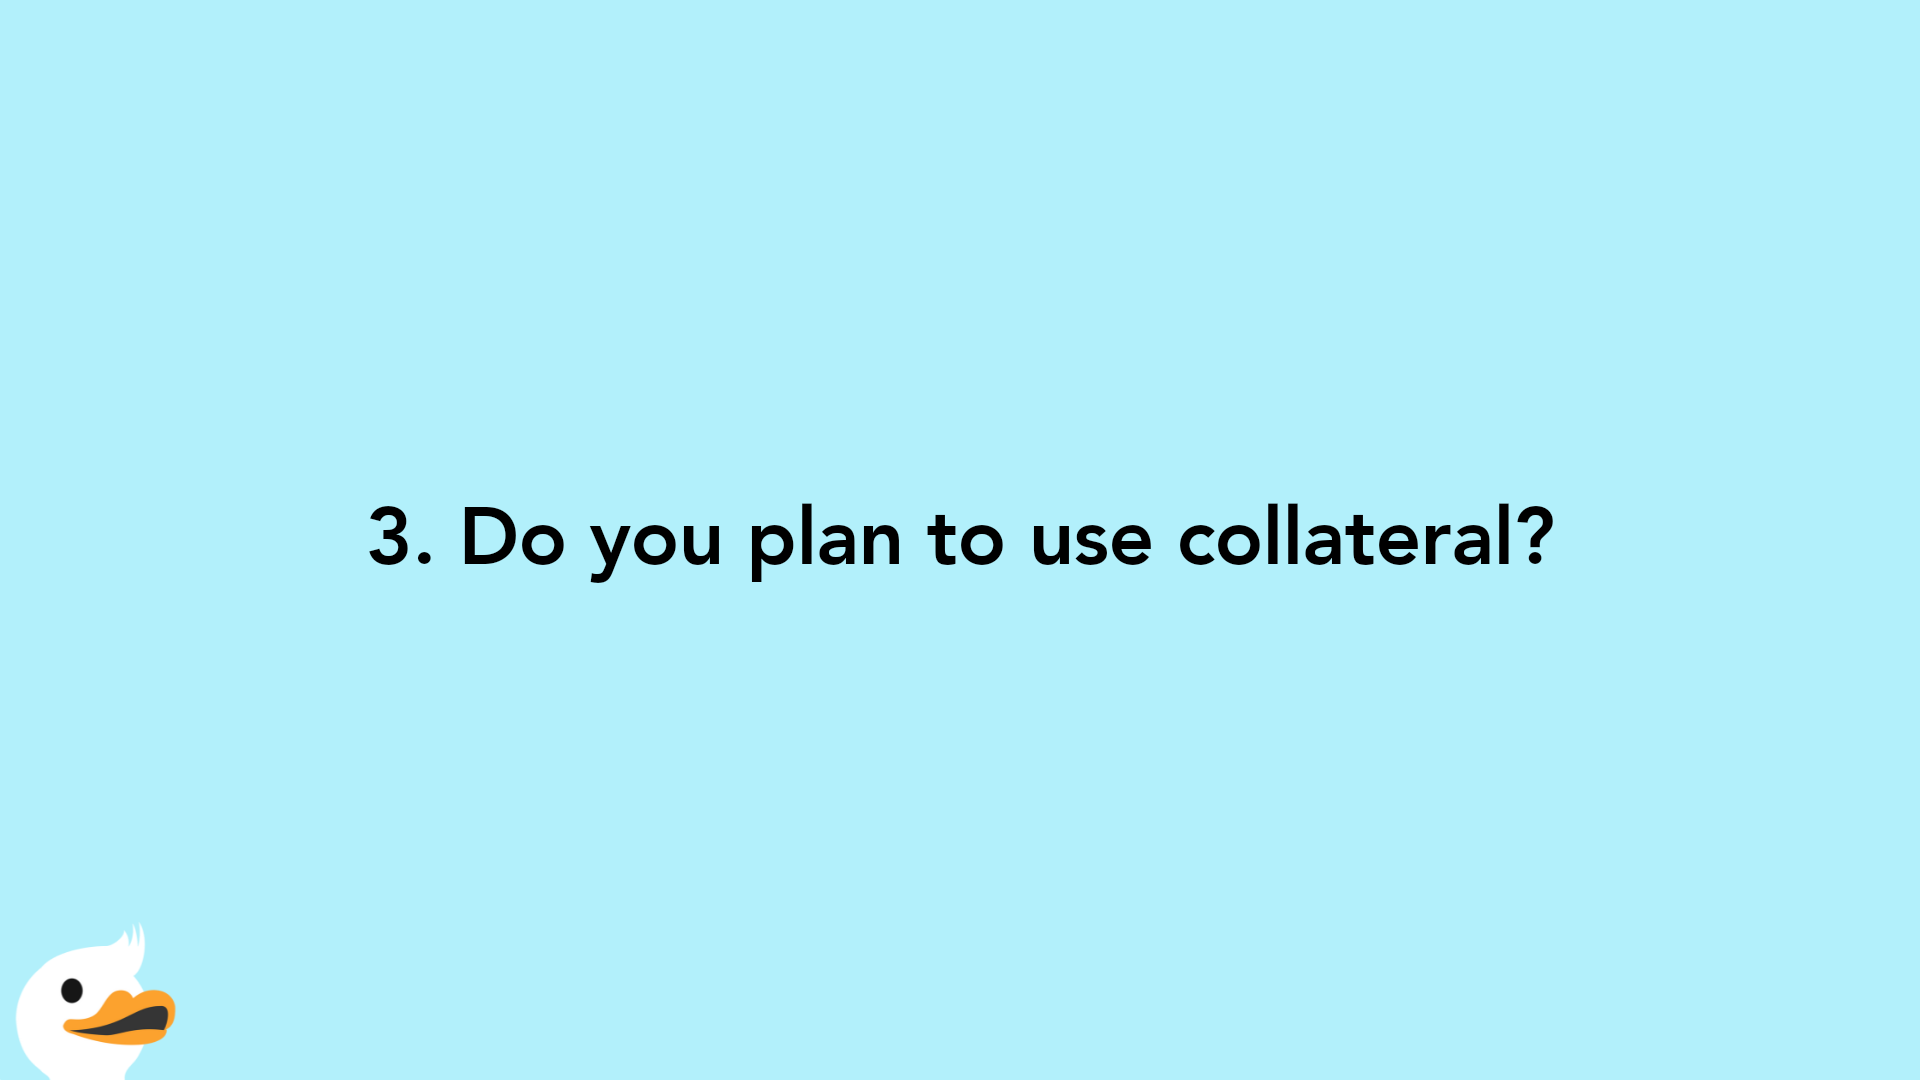 3. Do you plan to use collateral?